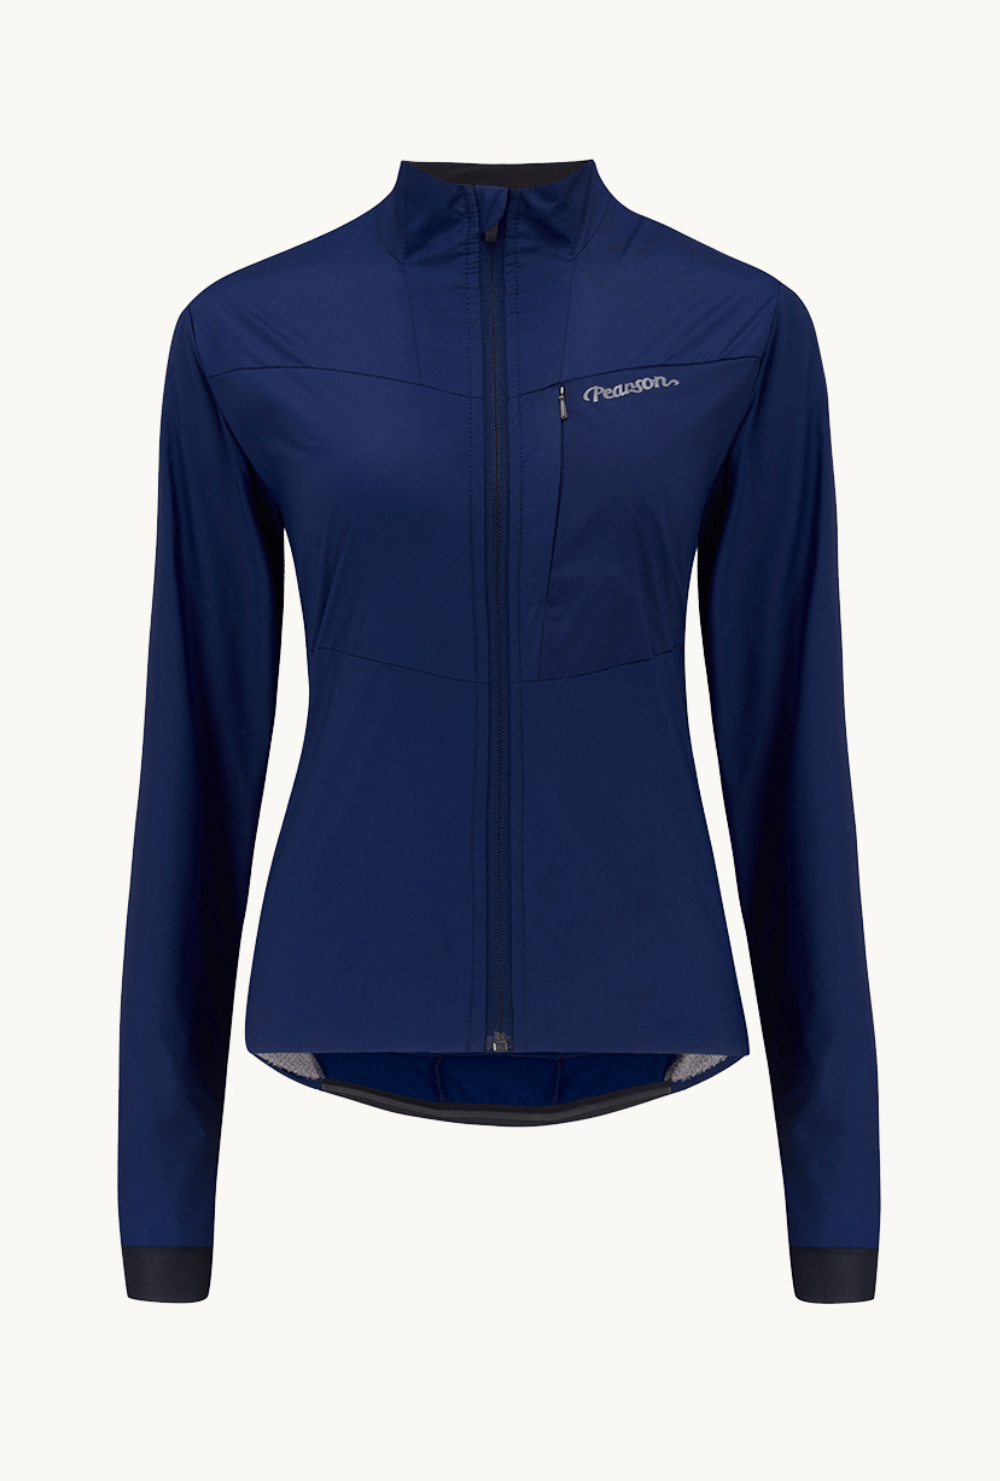 Pearson 1860  Test Your Mettle - Womens Road Insulated Jacket Blue Ink  Blue Ink / Medium